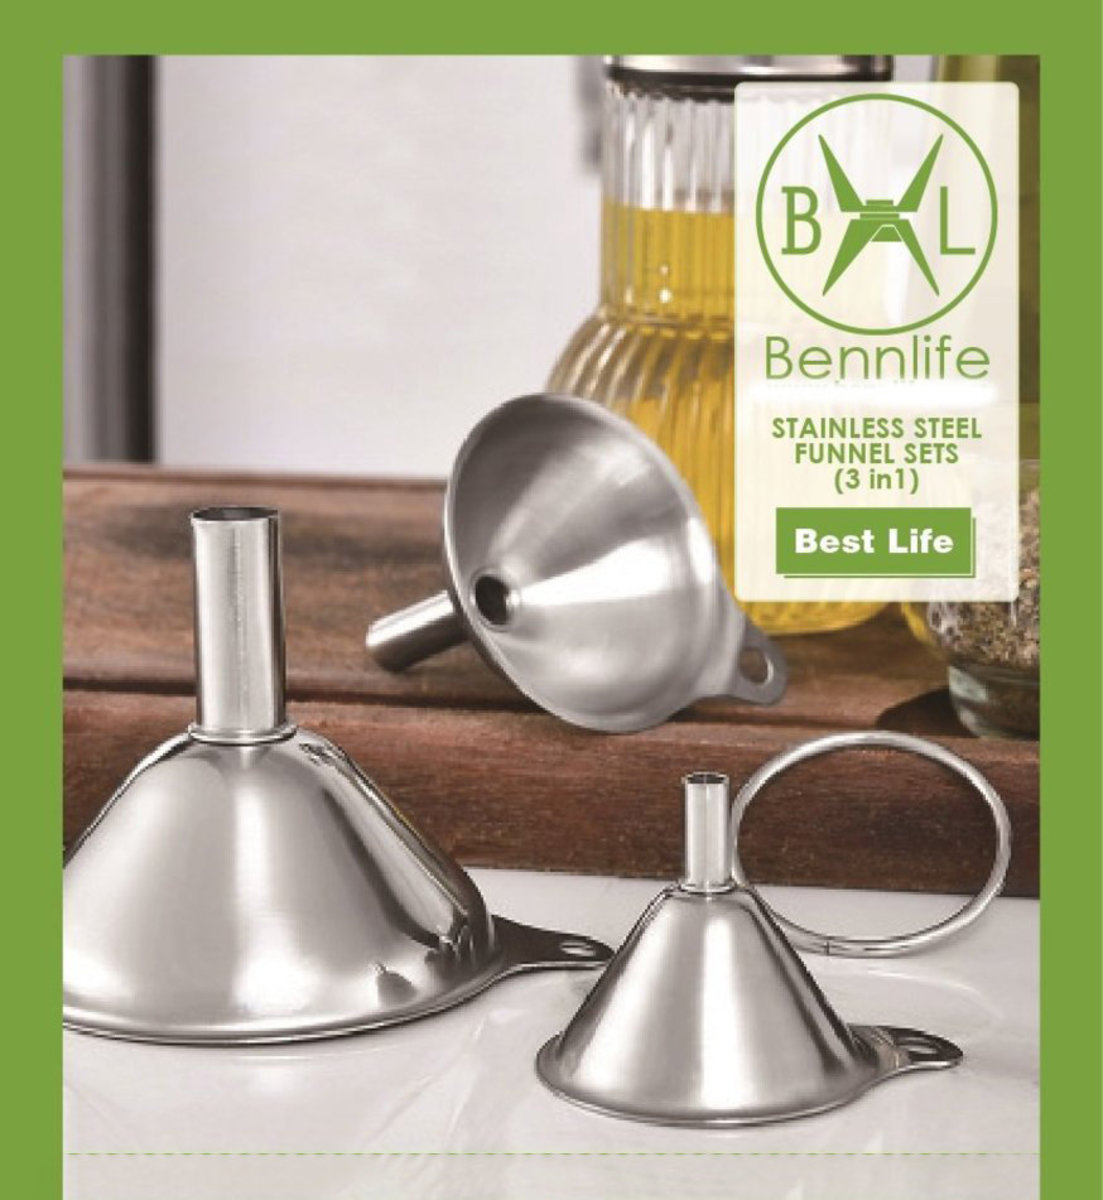 Bennlife Stainless Steel Funnel Sets (3 in1)